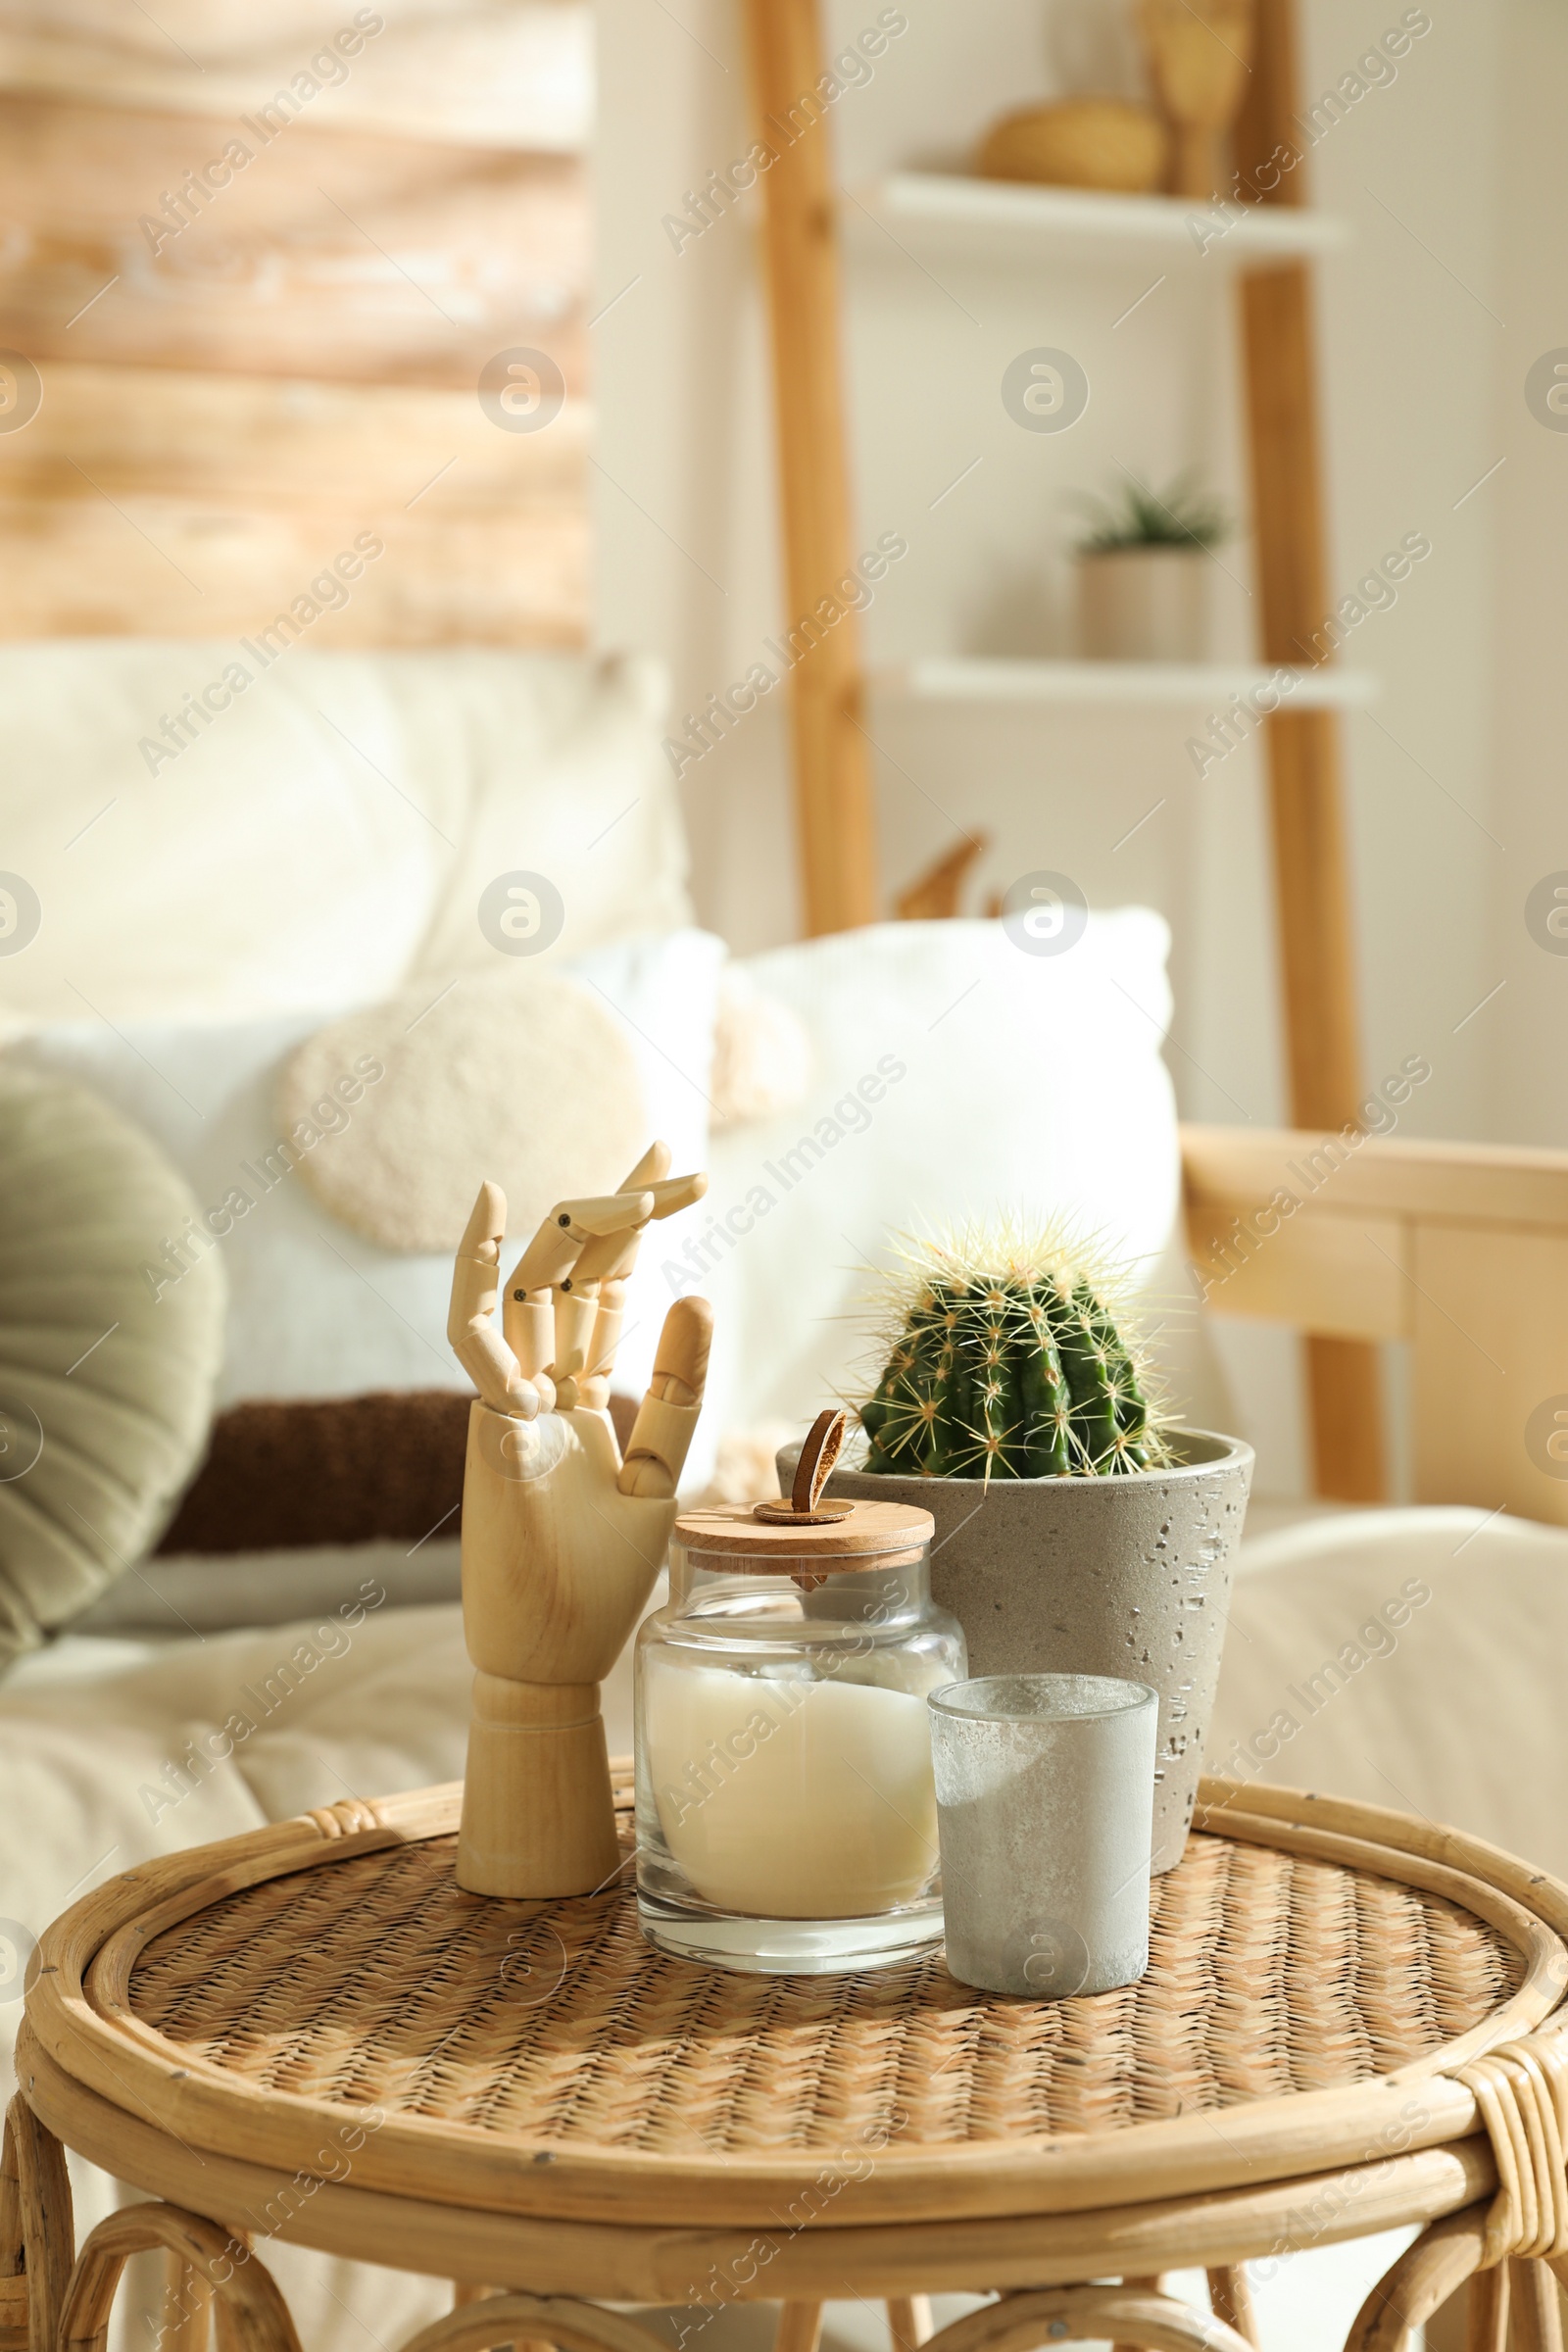 Photo of Stylish decor on table in living room. Interior design